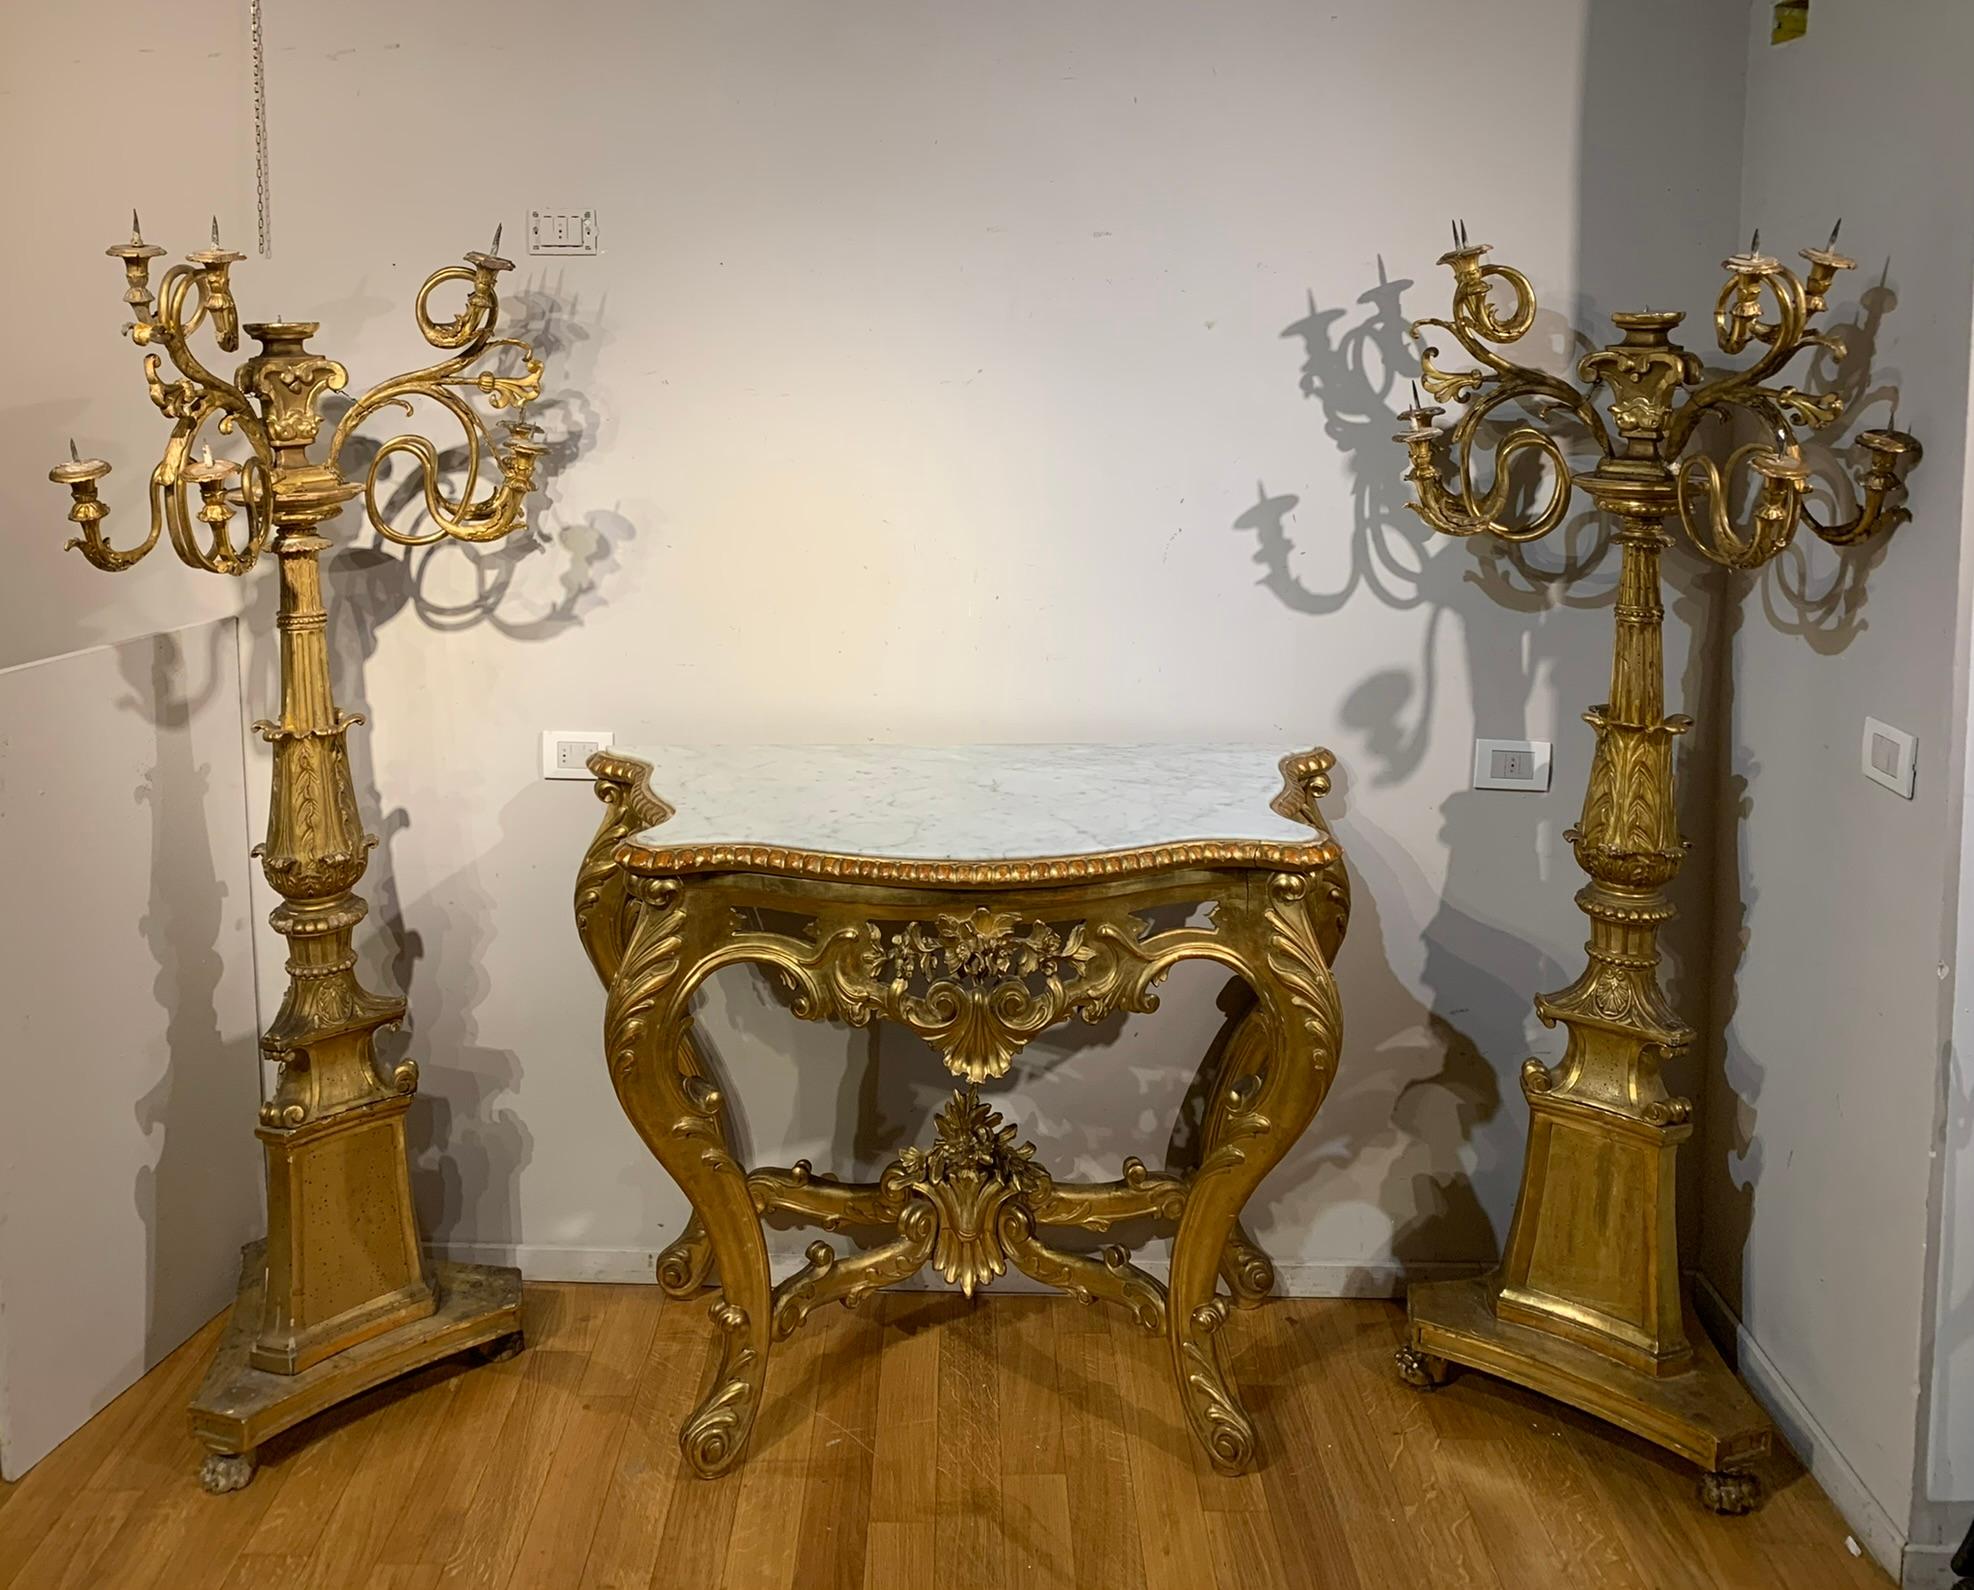 Beautiful wooden console carved with floral motifs, worked with great skill and refinement. Its elegance is accentuated by the pure gold gilded finish, which gives it a bright and luxurious appearance. It is a wall cabinet, designed to be fixed to